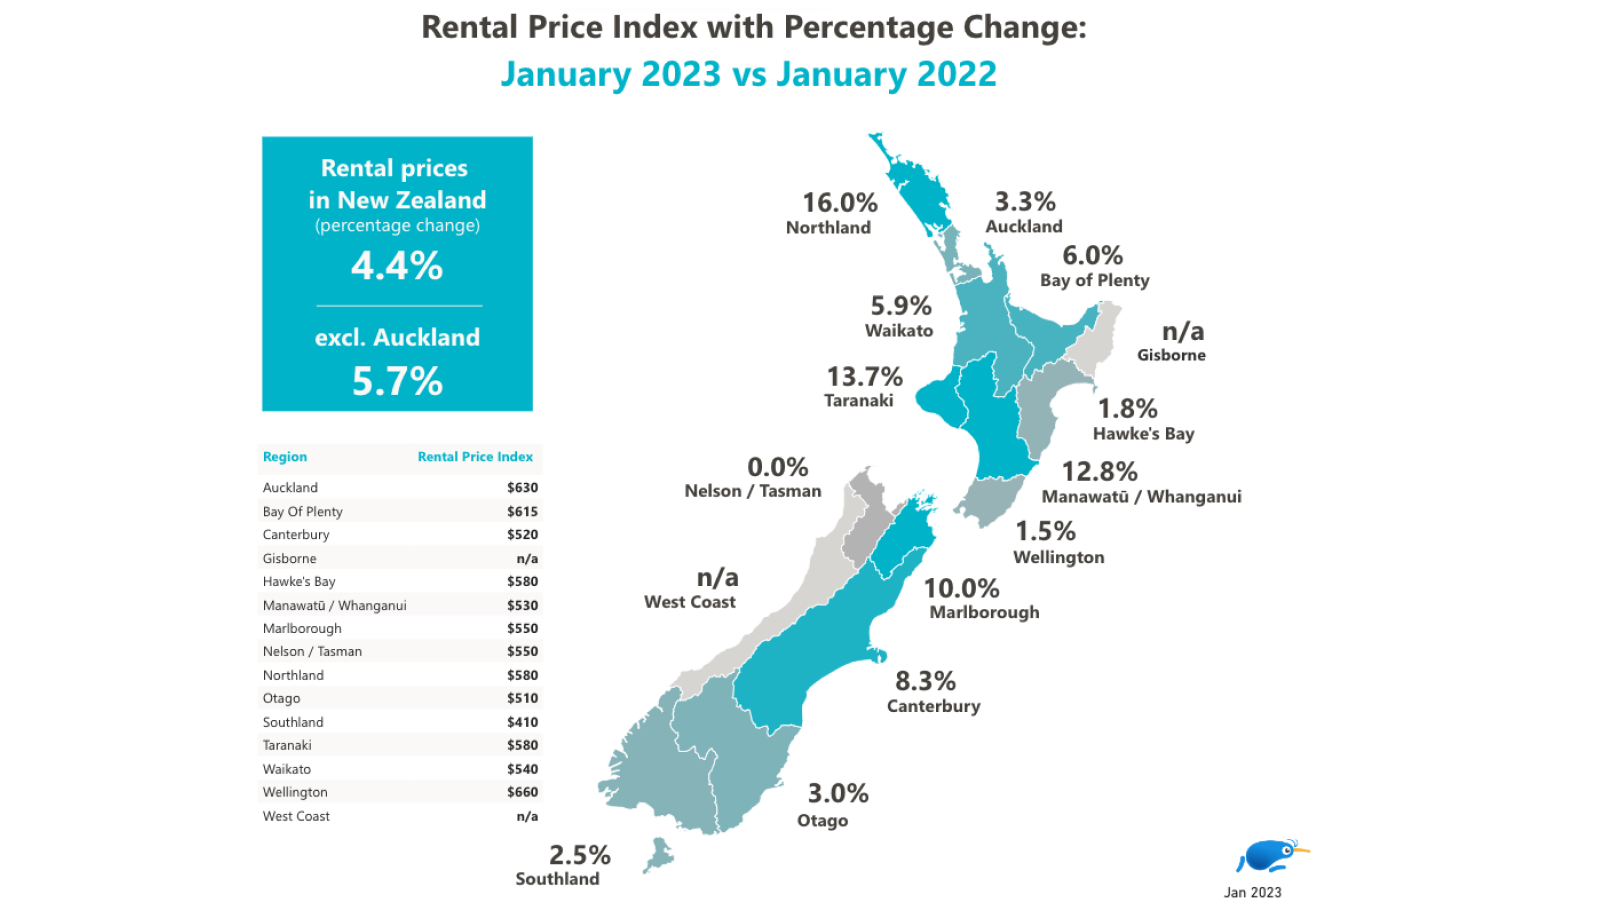 Map of New Zealand with the rental price index percentage change